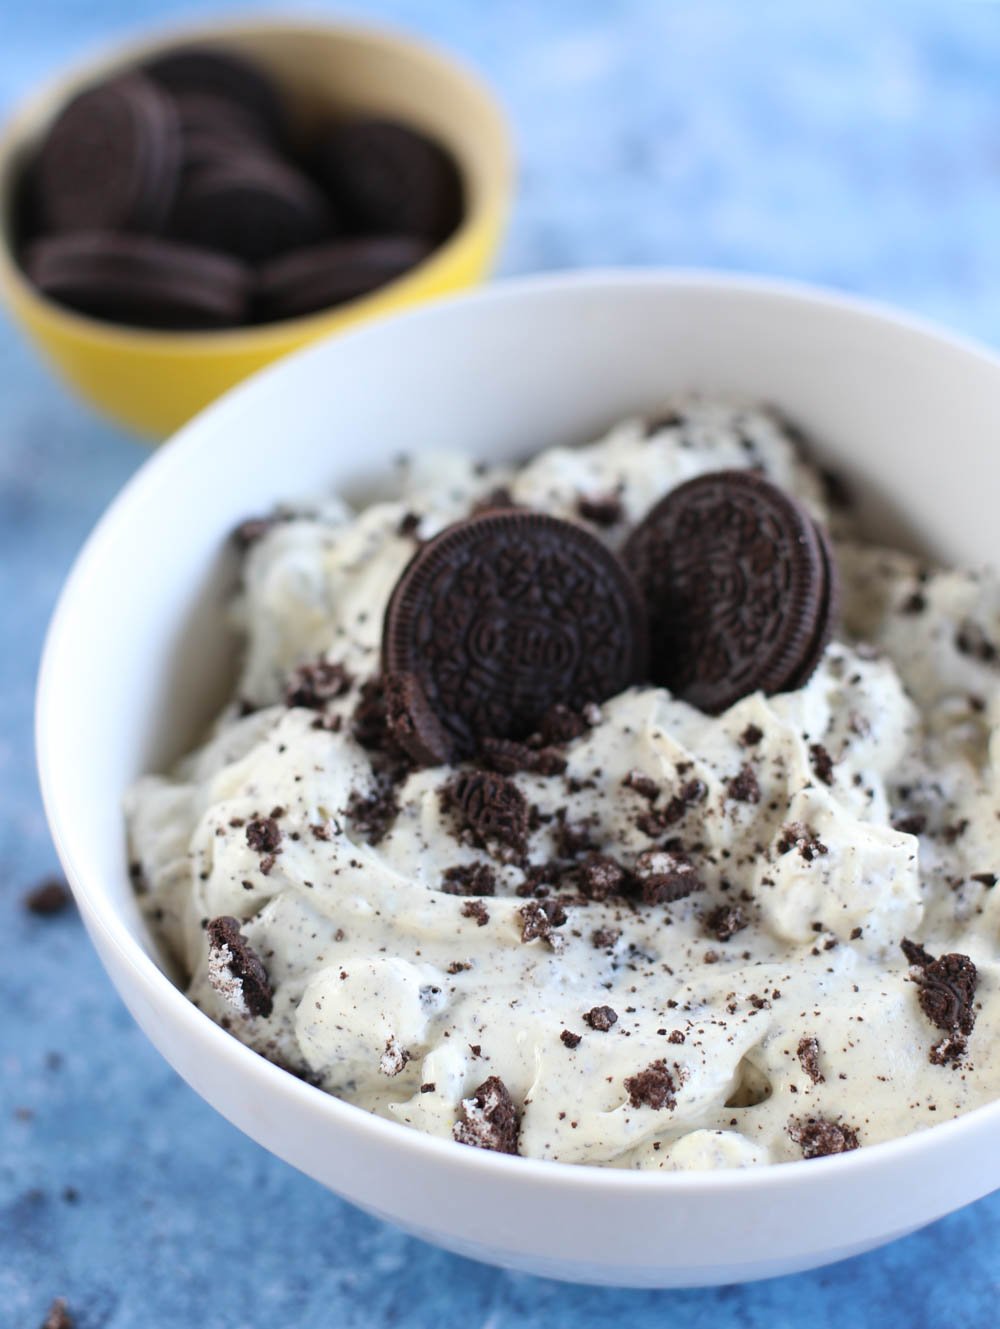 Oreo Fluff in a white bowl with two whole Oreos on top and a small yellow bowl with more Oreos in the background.